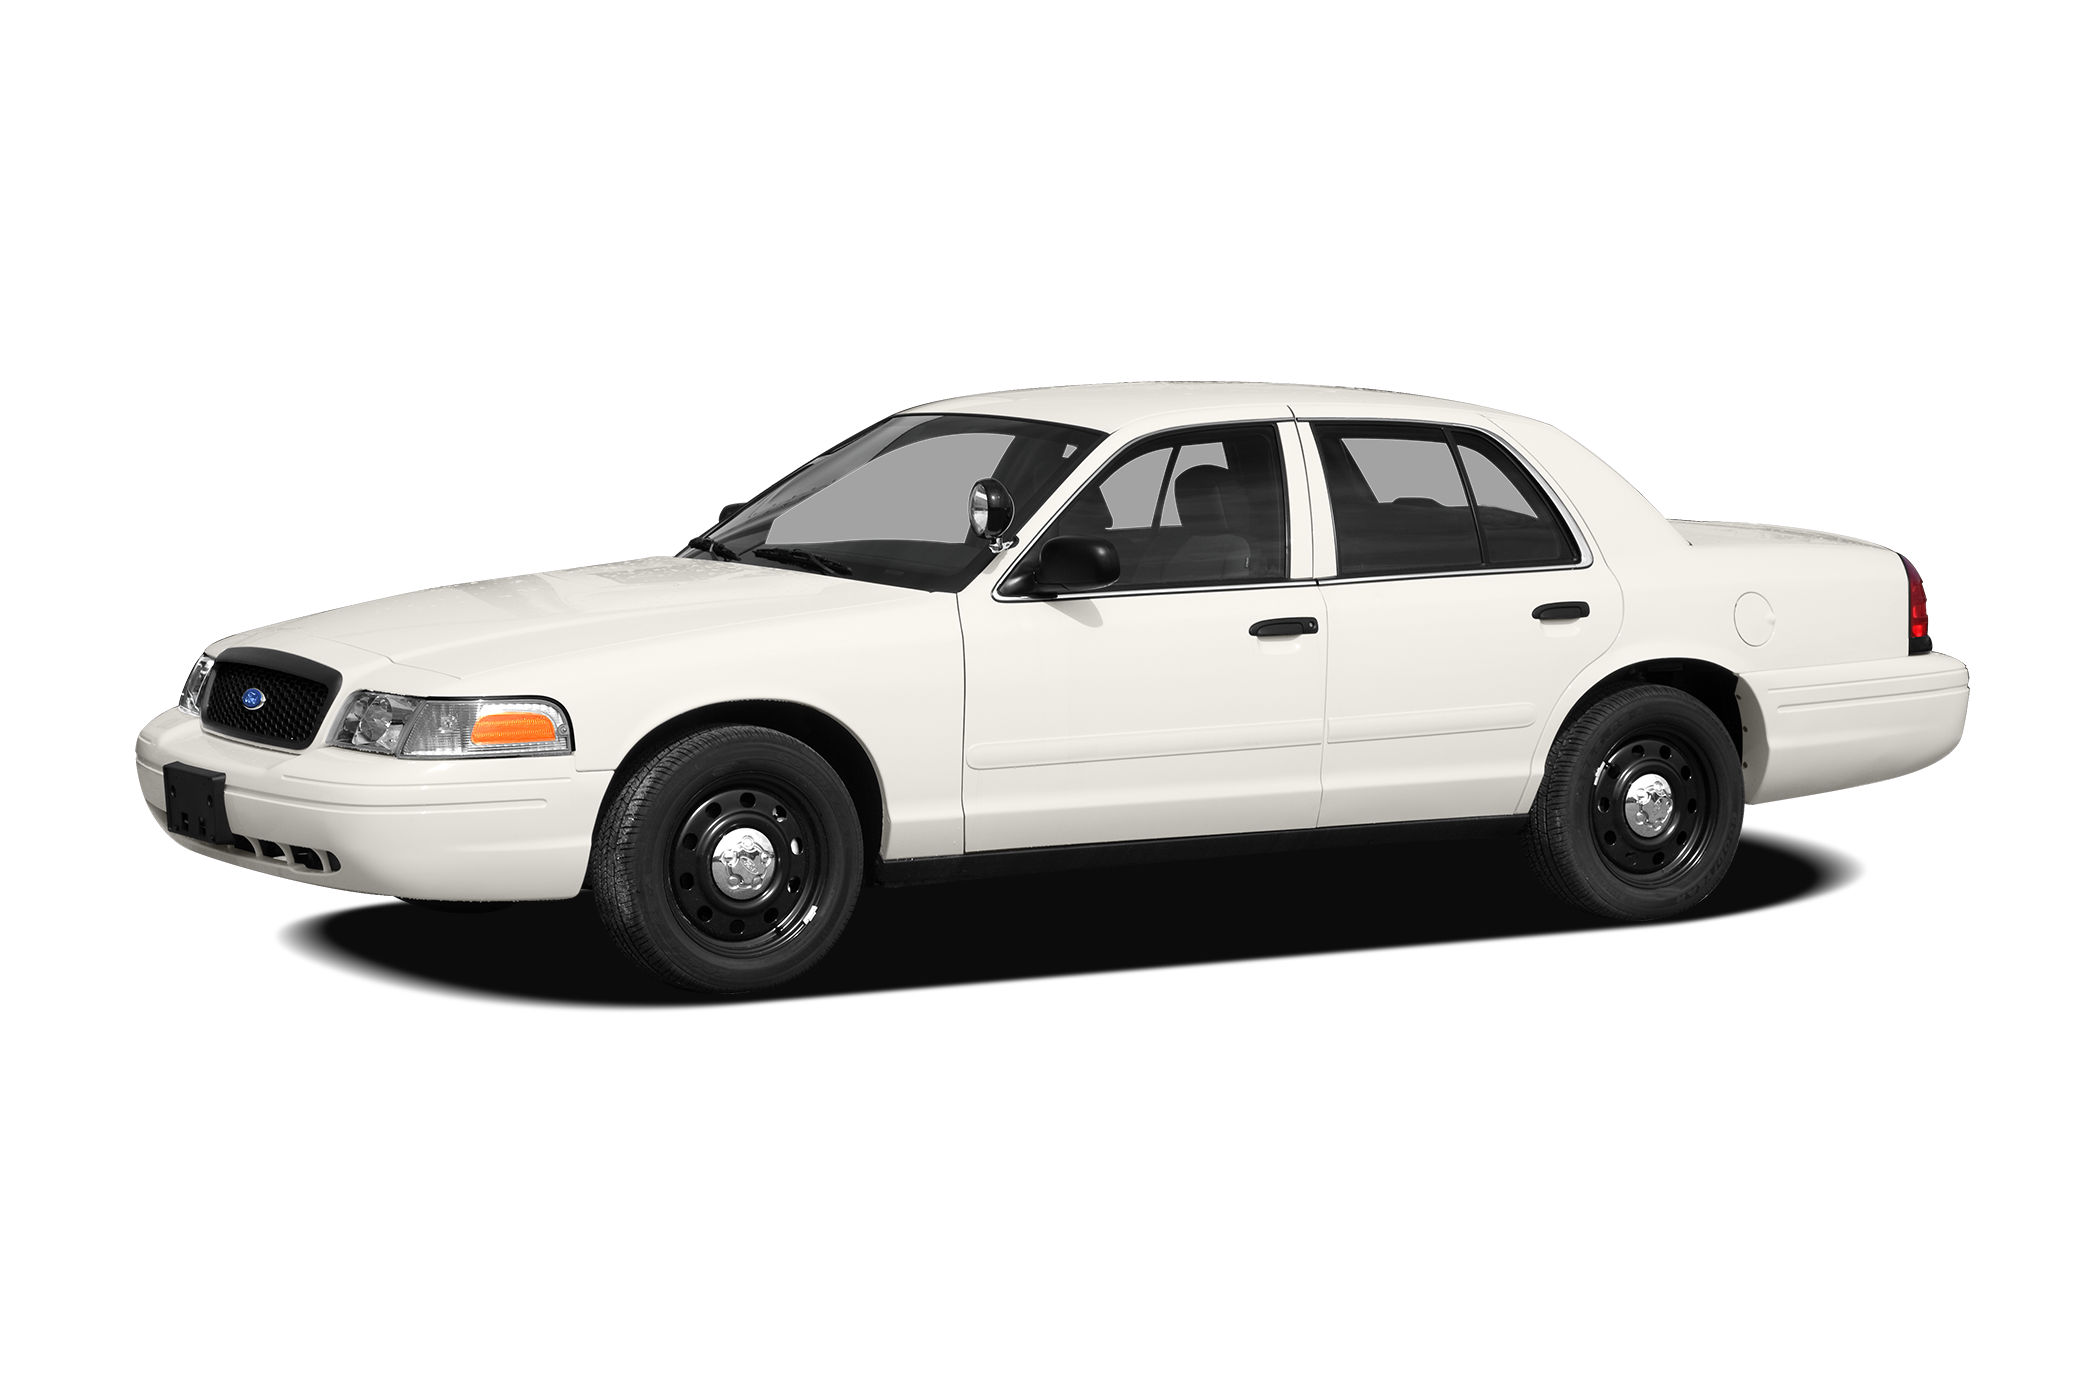 2009 Ford Crown Victoria - View Specs, Prices & Photos ...